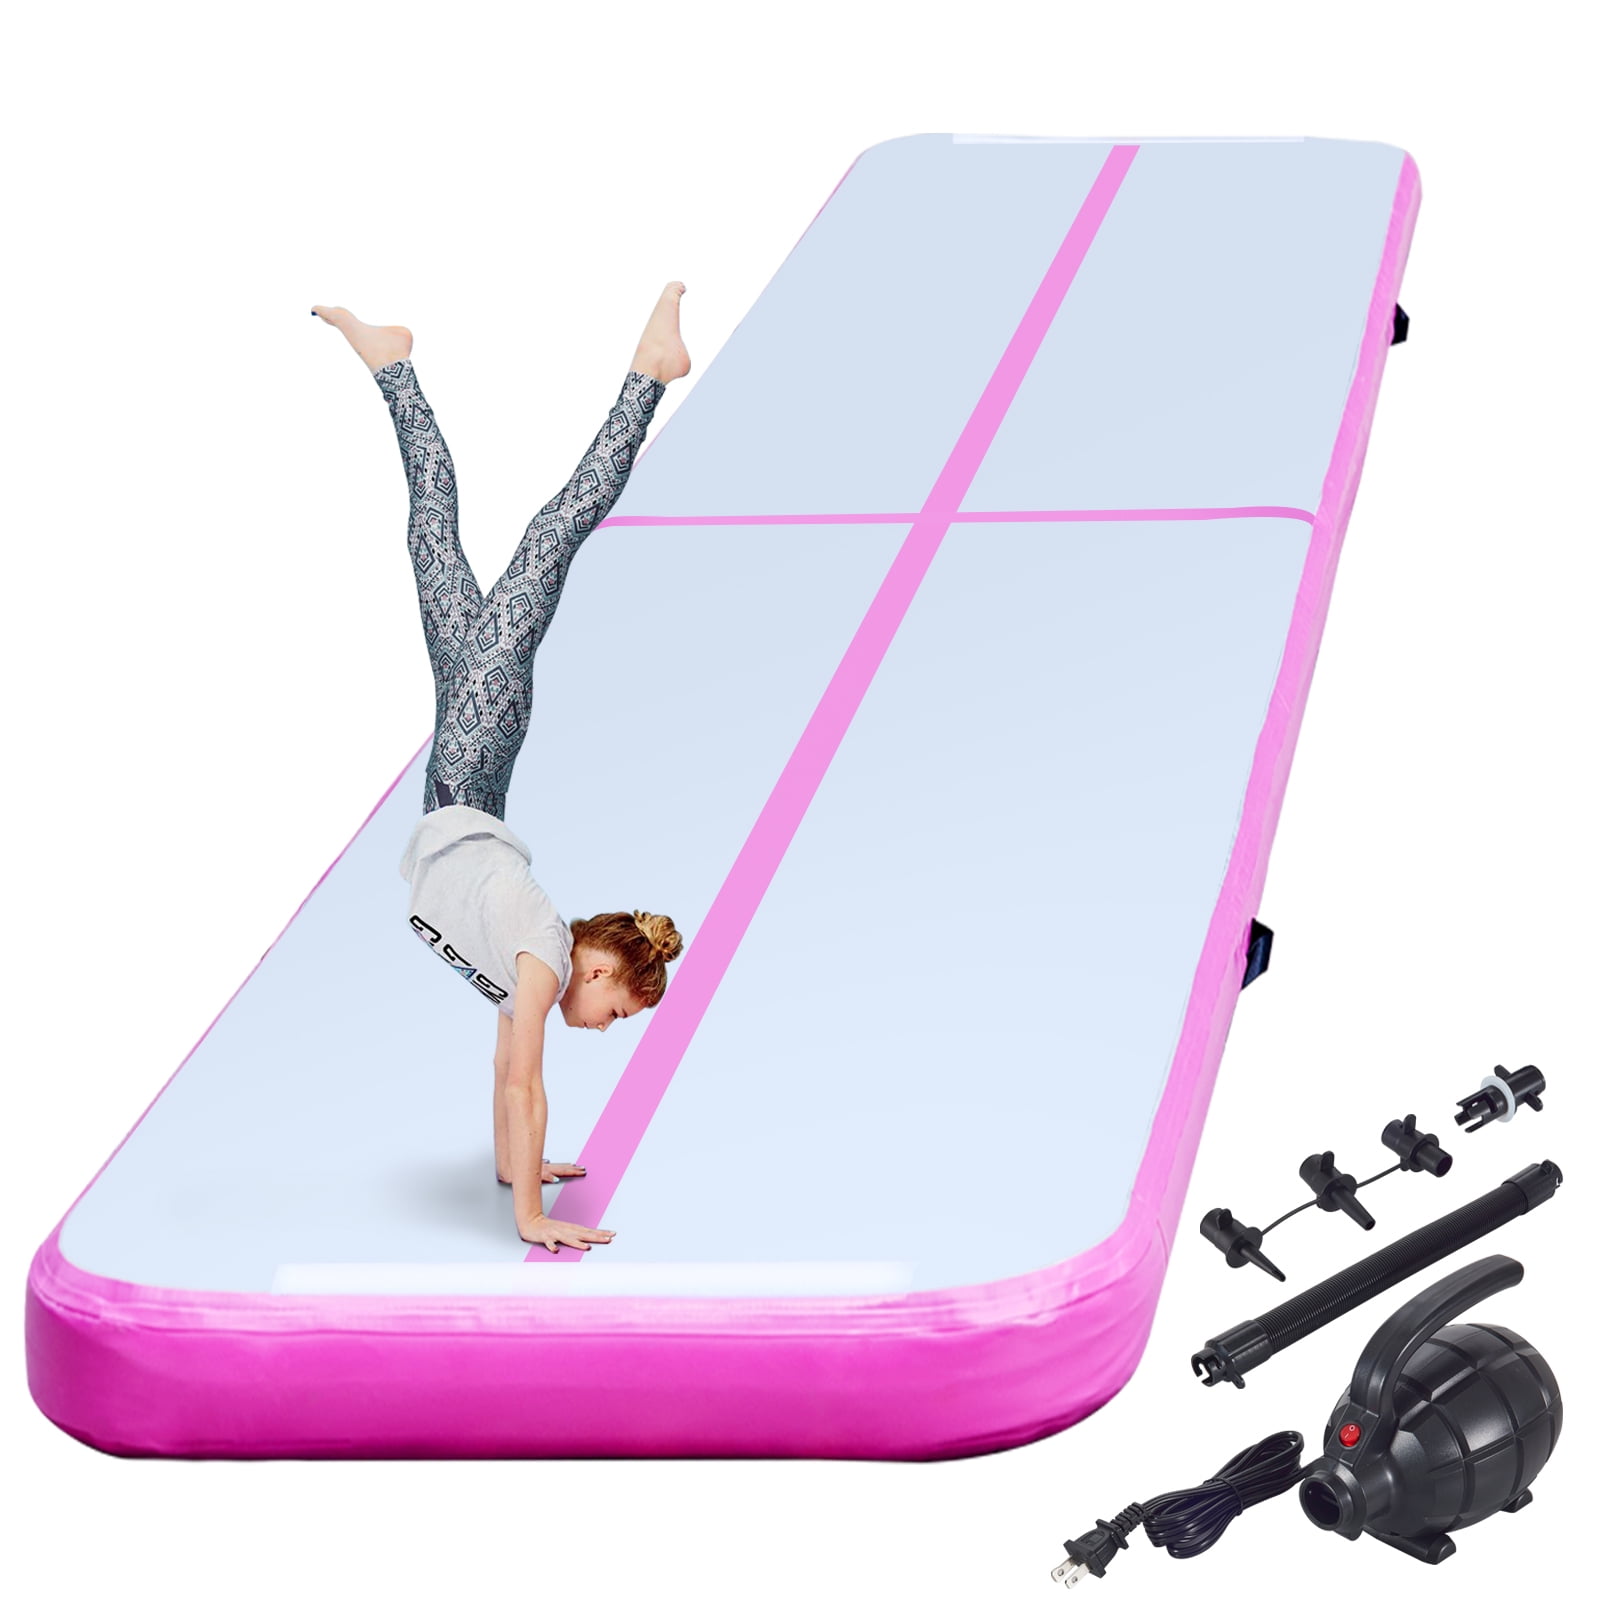 CHENGLE Air Mat Tumble Track Gymnastics Inflatable Tumbling Mat with Electric Air Pump for Home Use/Tumble/Gym/Training/Cheerleading 